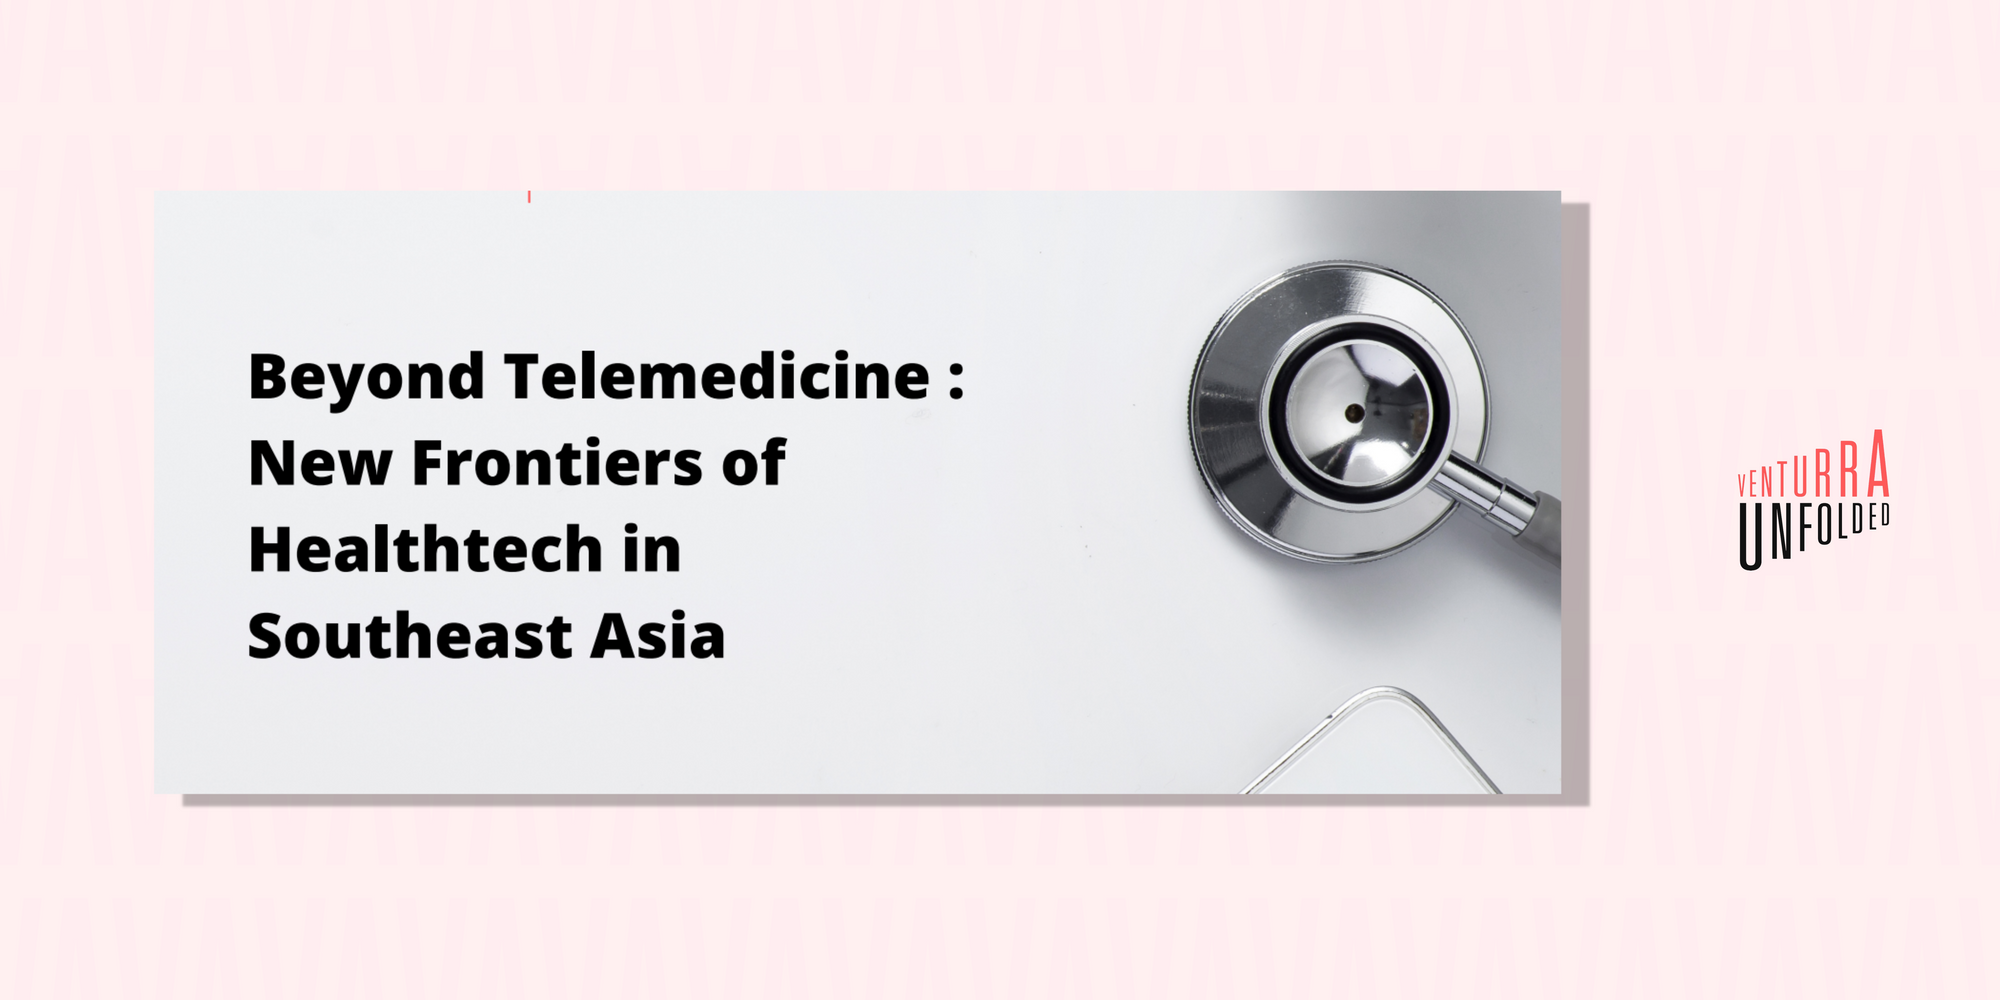 Beyond Telemedicine: New Frontiers of Healthtech in Southeast Asia